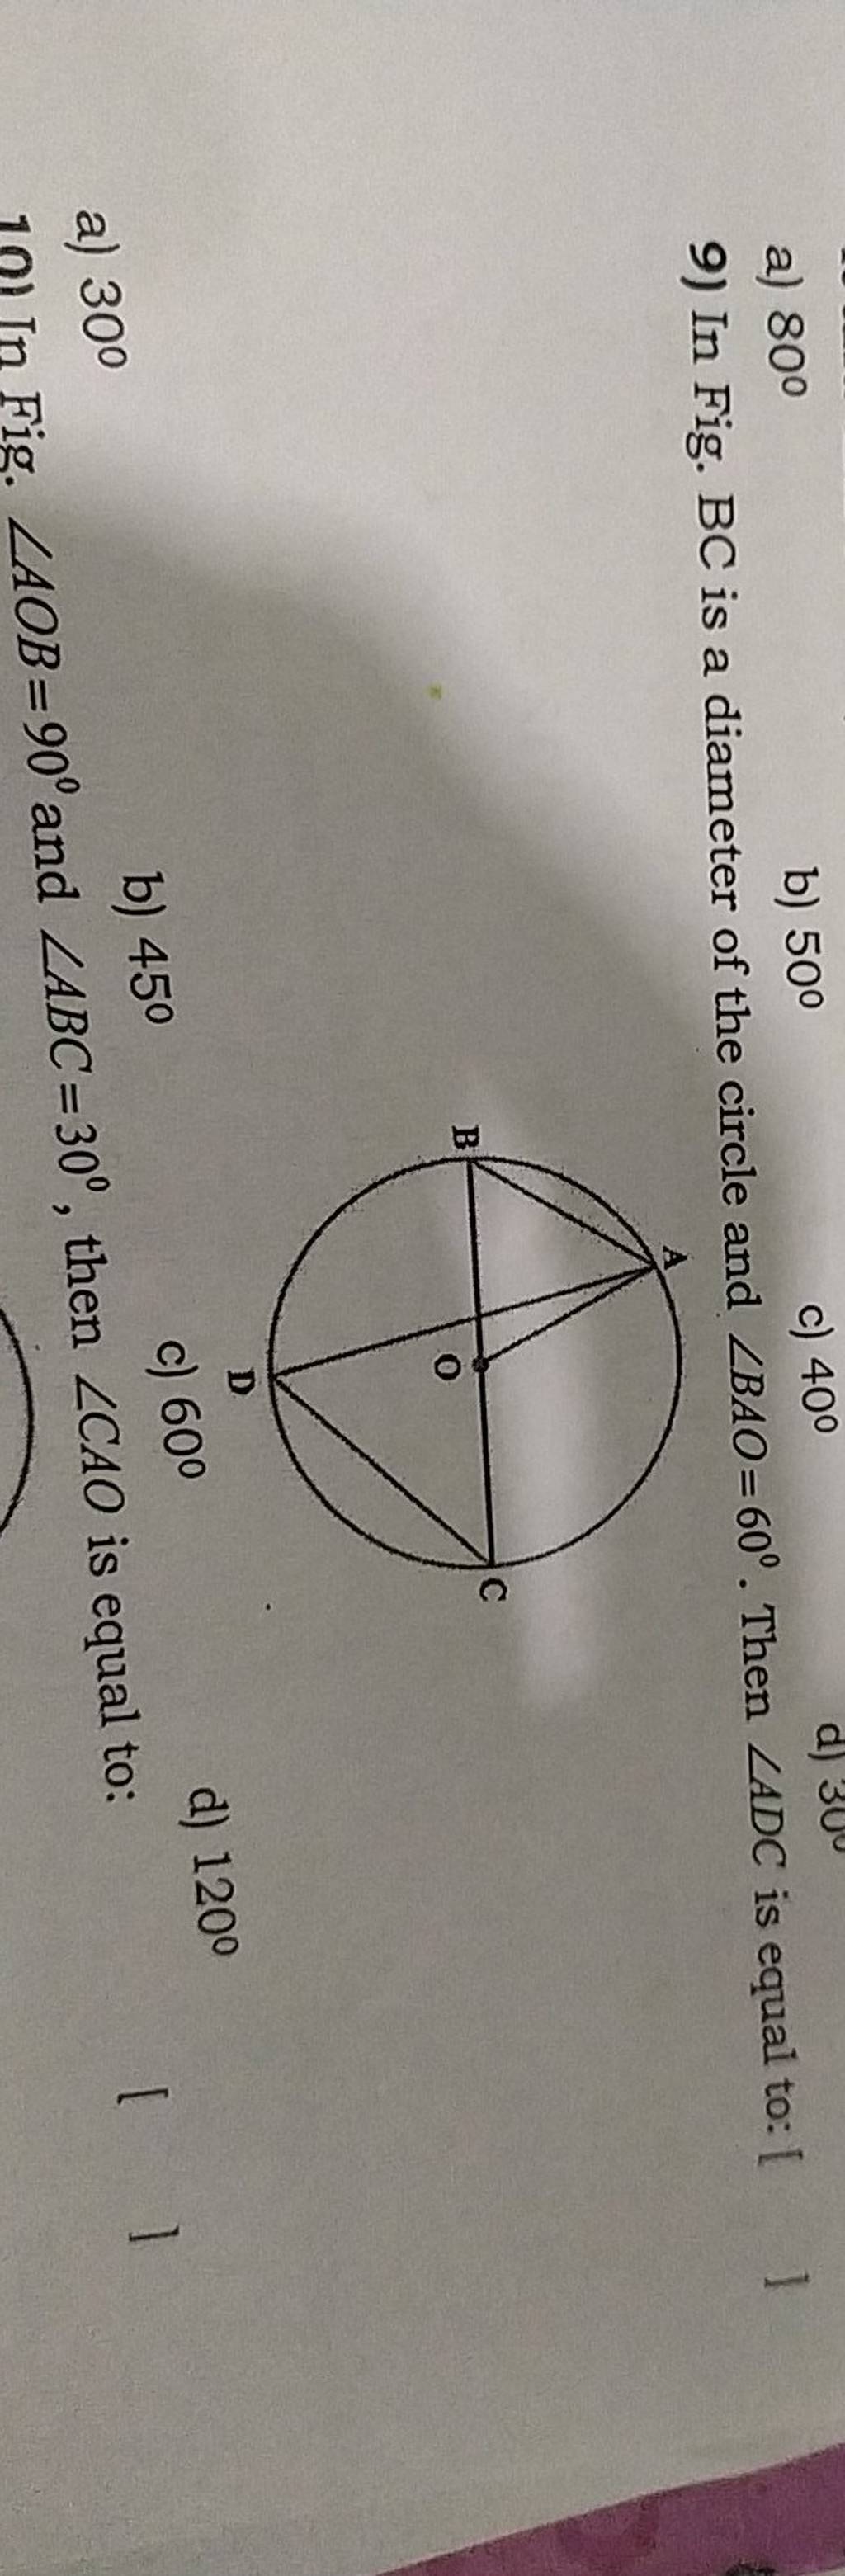 a) 80∘
b) 50∘
c) 40∘
9) In Fig. BC is a diameter of the circle and ∠BA